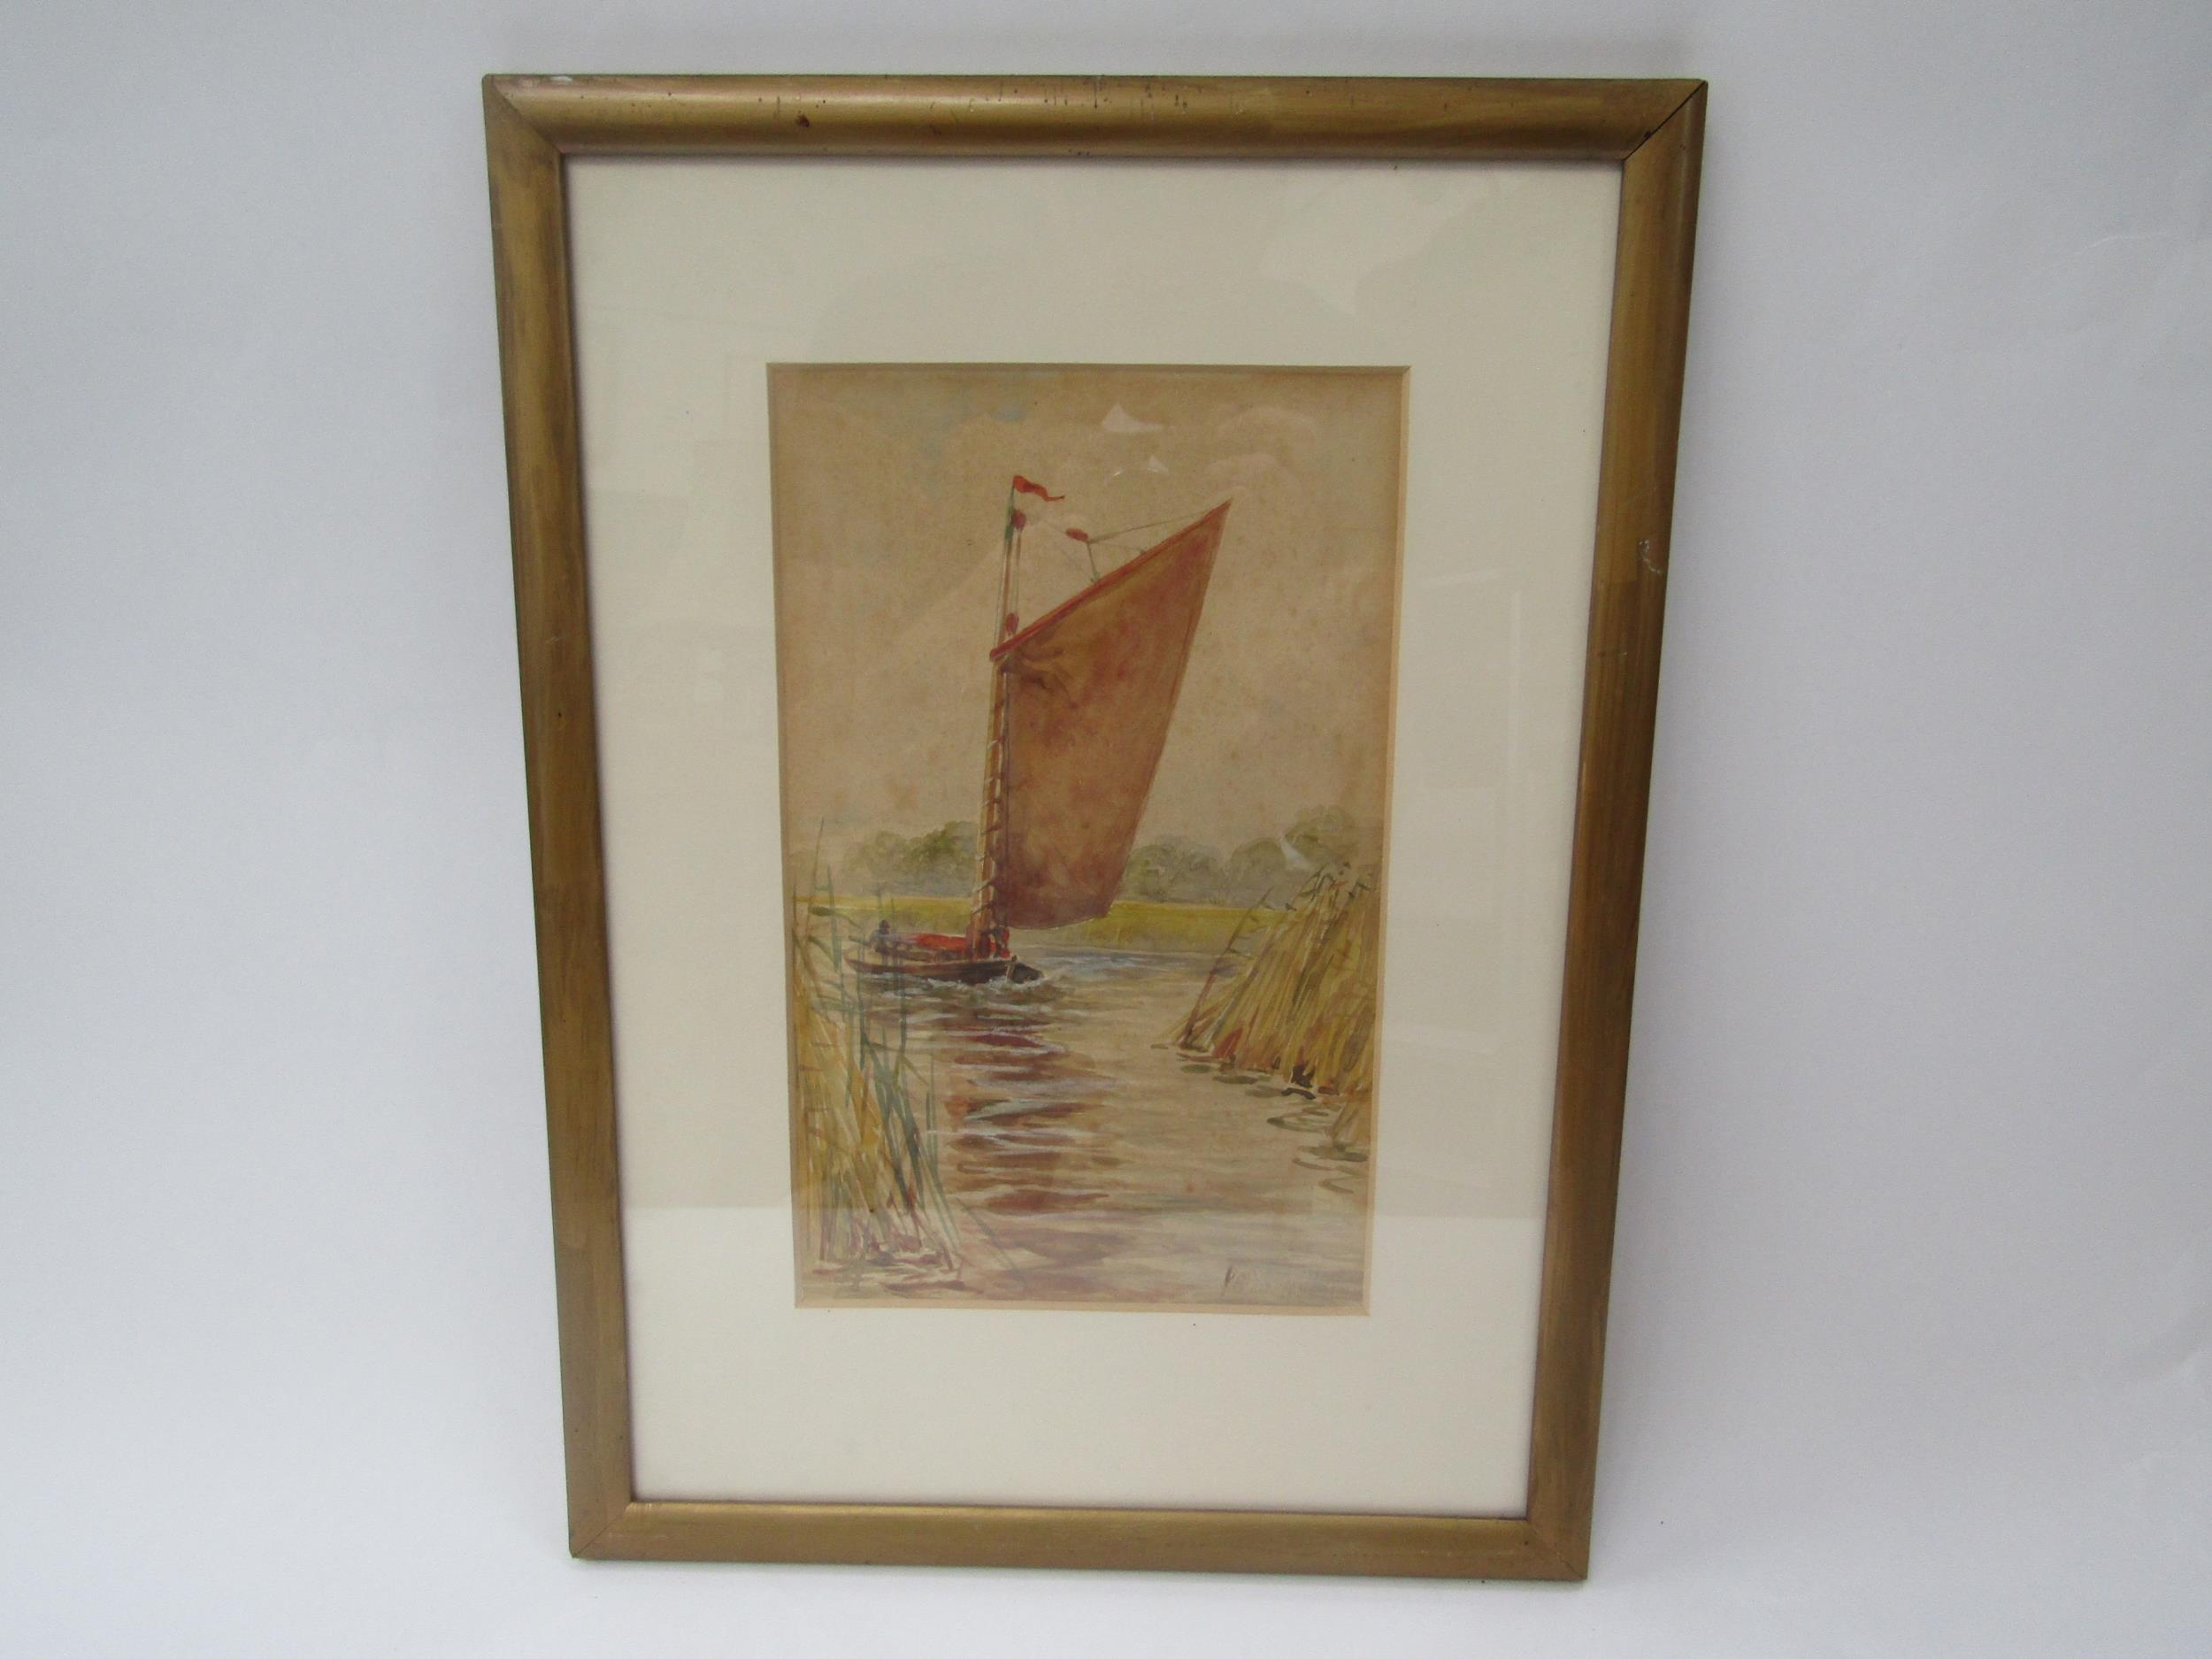 An early 20th Century watercolour depicting wherry boat sailing on the Broads, indistinctly